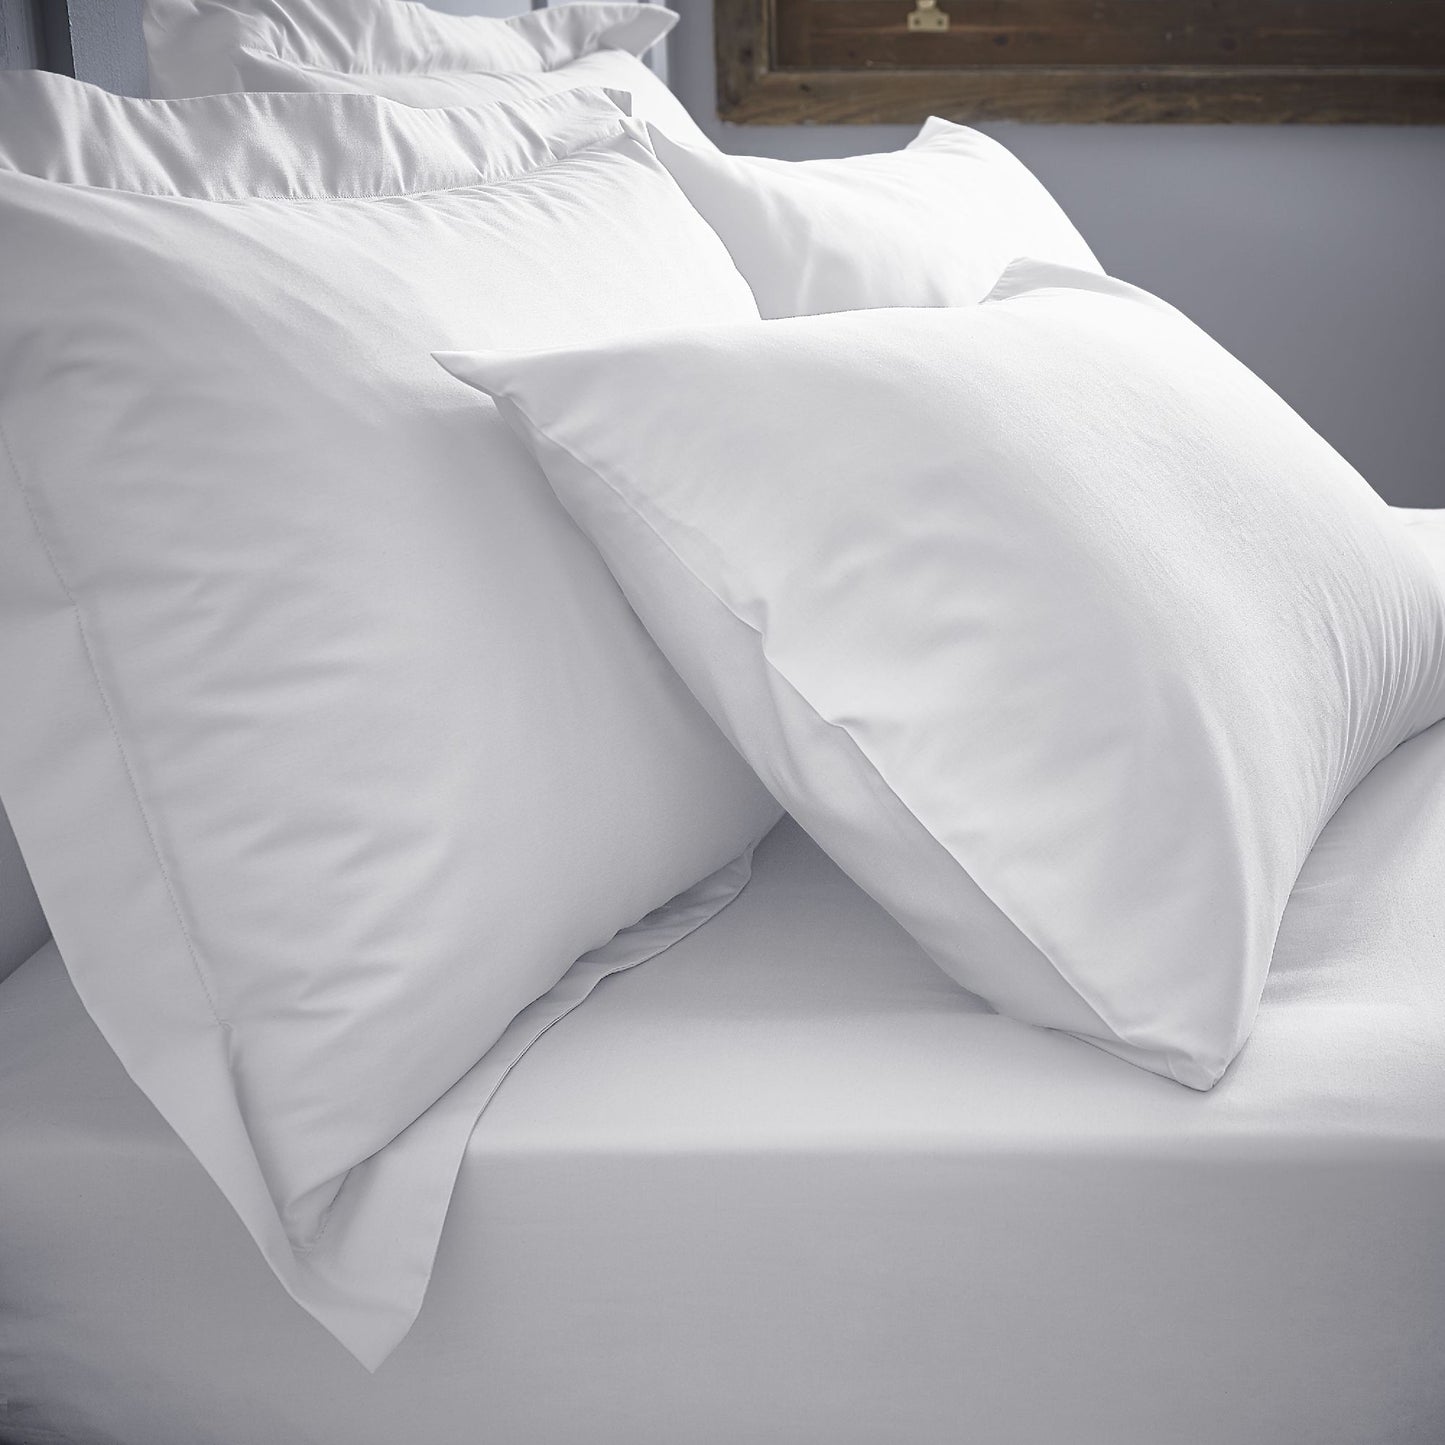 Bianca White 200TC Cotton Percale Deep (32cm) Fitted Sheet